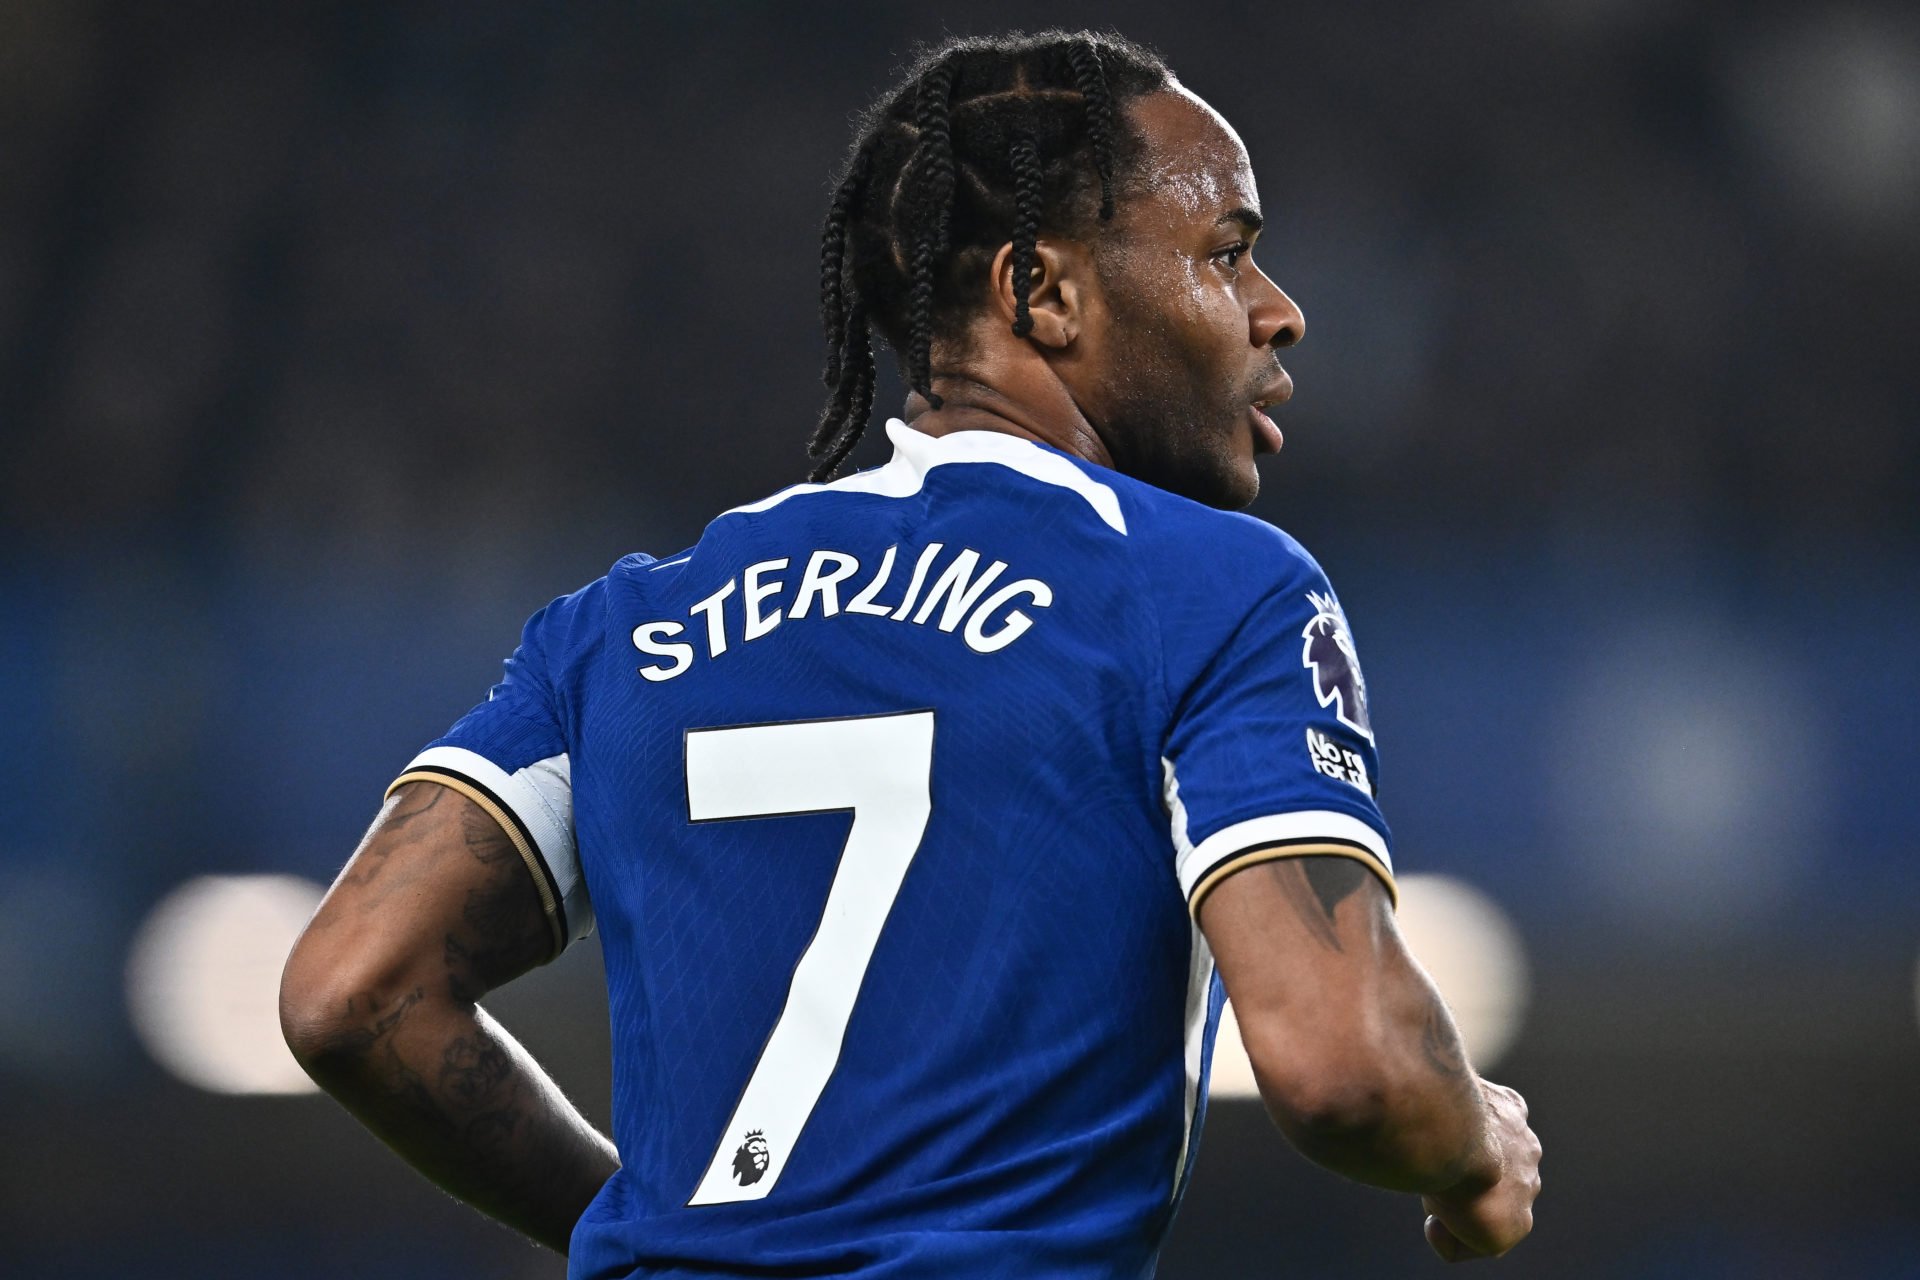 26-year-old player can be the marquee signing Chelsea expected Raheem Sterling to be